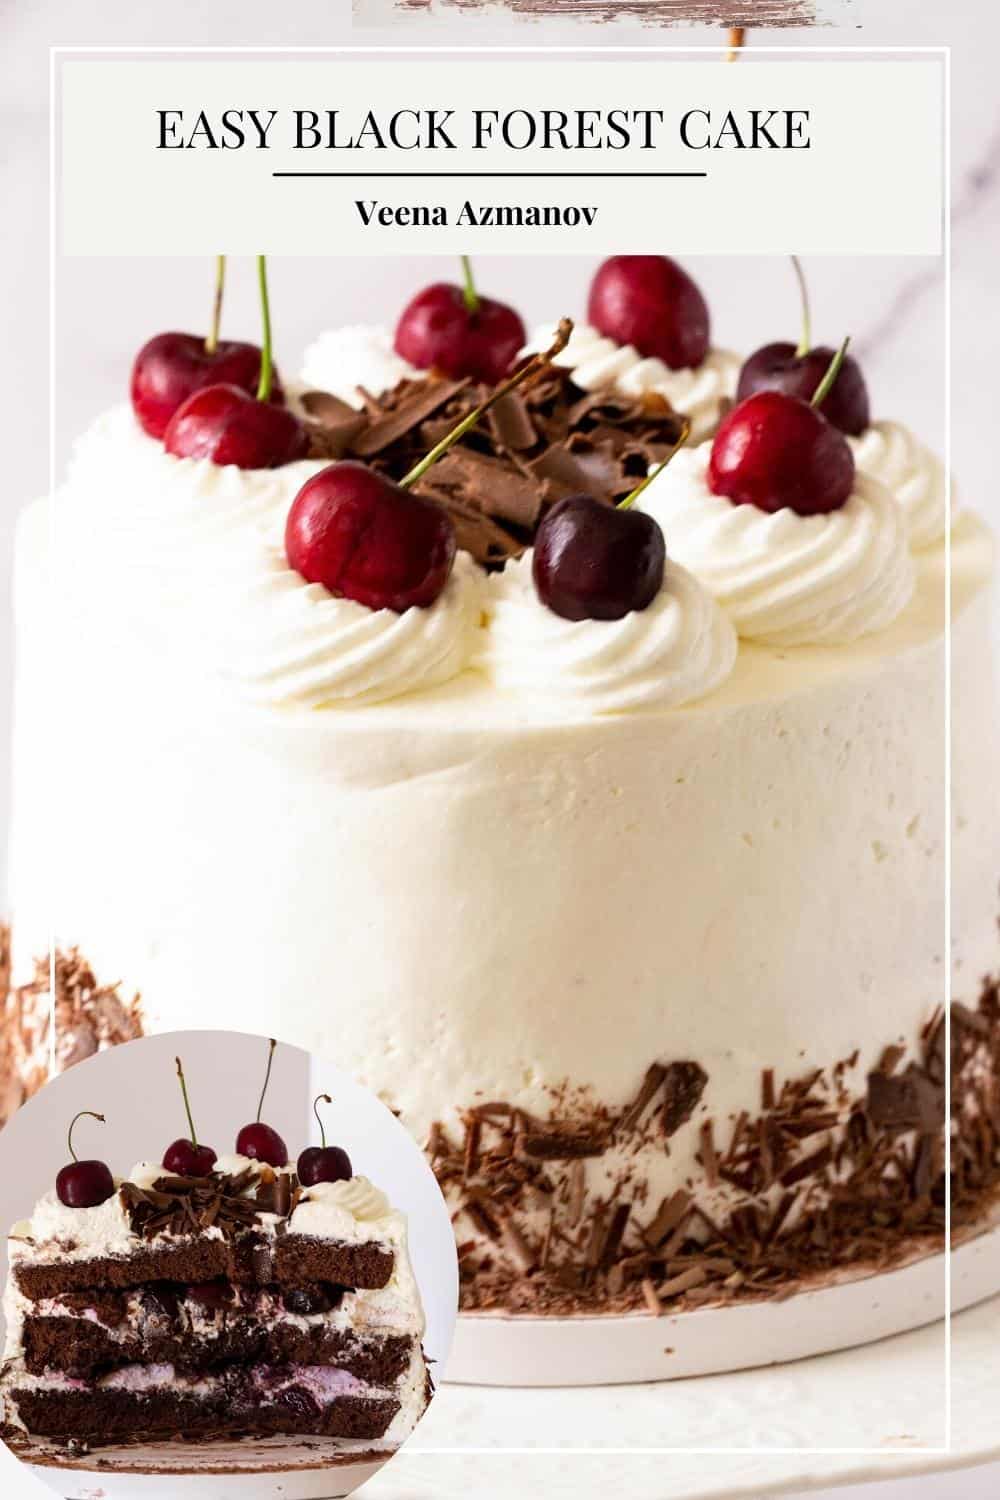 Black Forest Cake - chocolate, cherries, and whipped cream. So luscious!-sgquangbinhtourist.com.vn